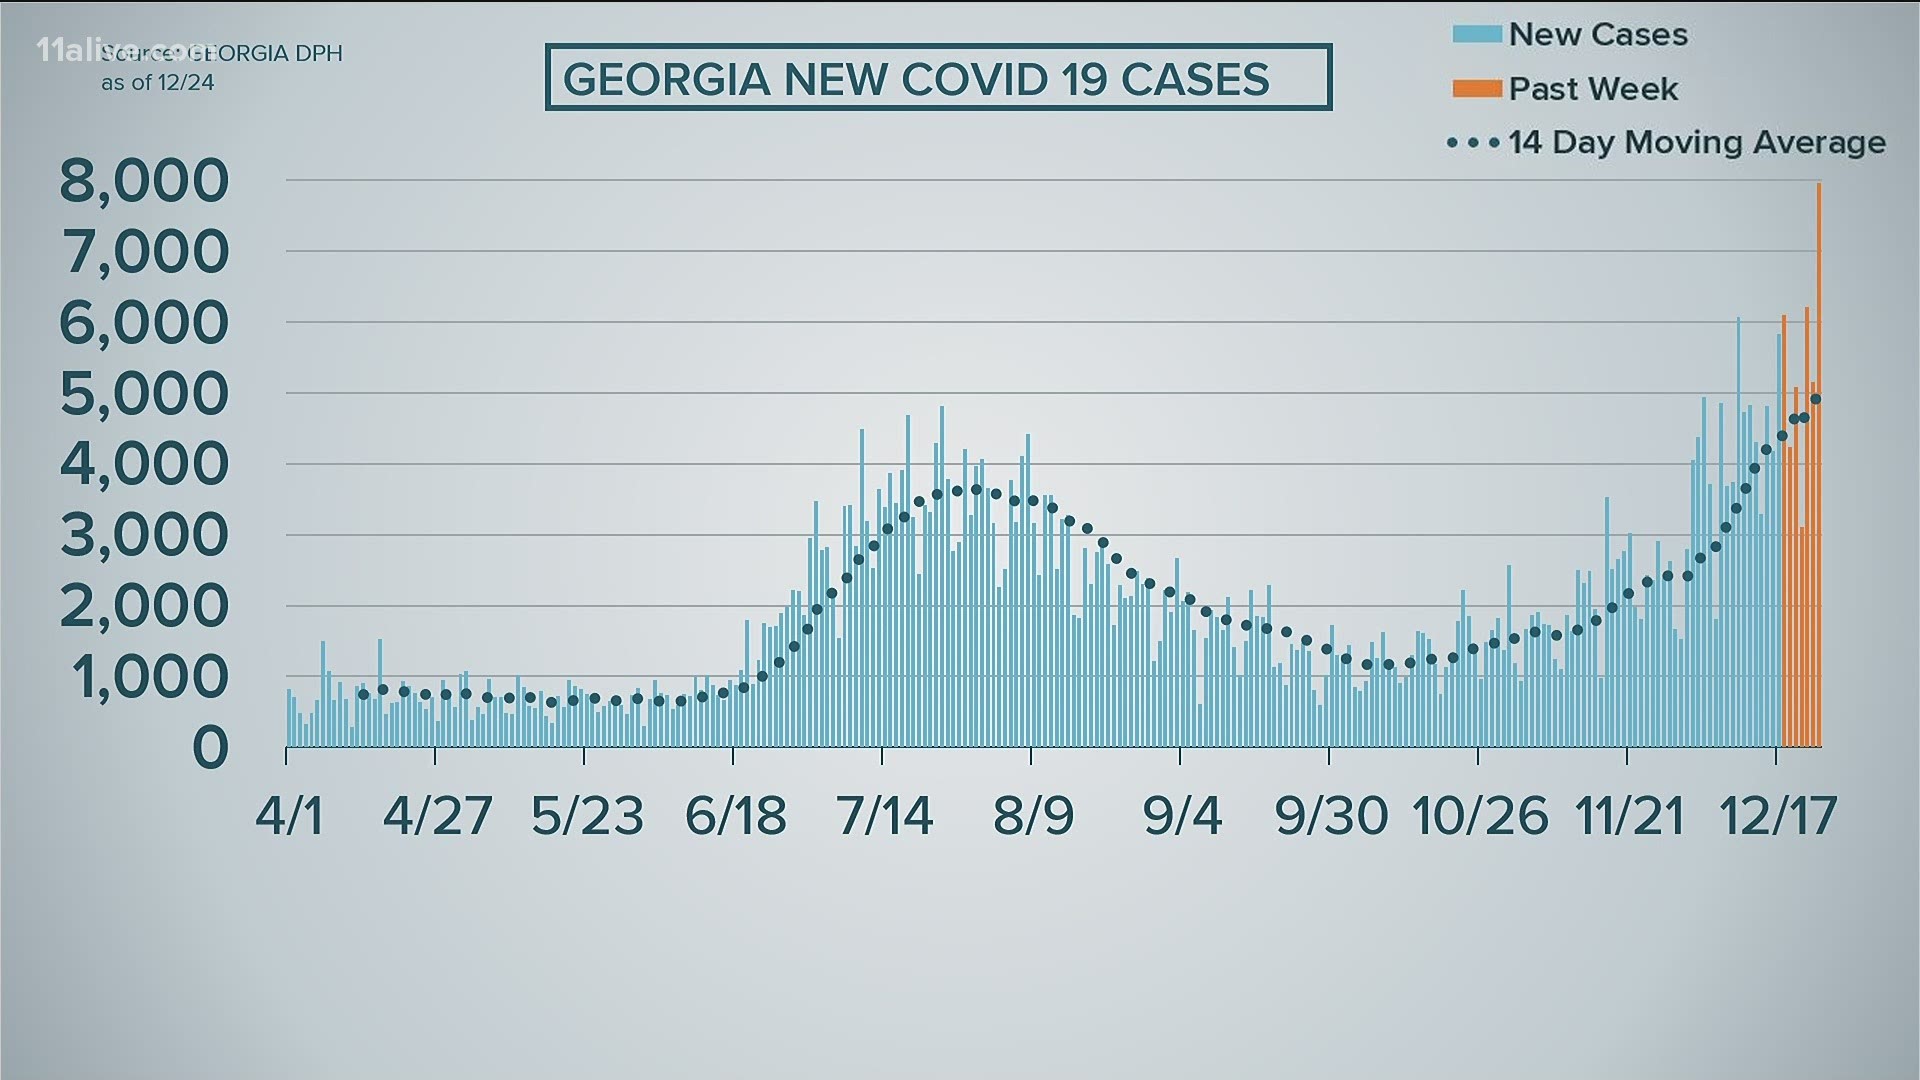 Early data suggests that the state hit close to 8,000 COVID cases, but final results have been delayed due to the sheer volume of data received.